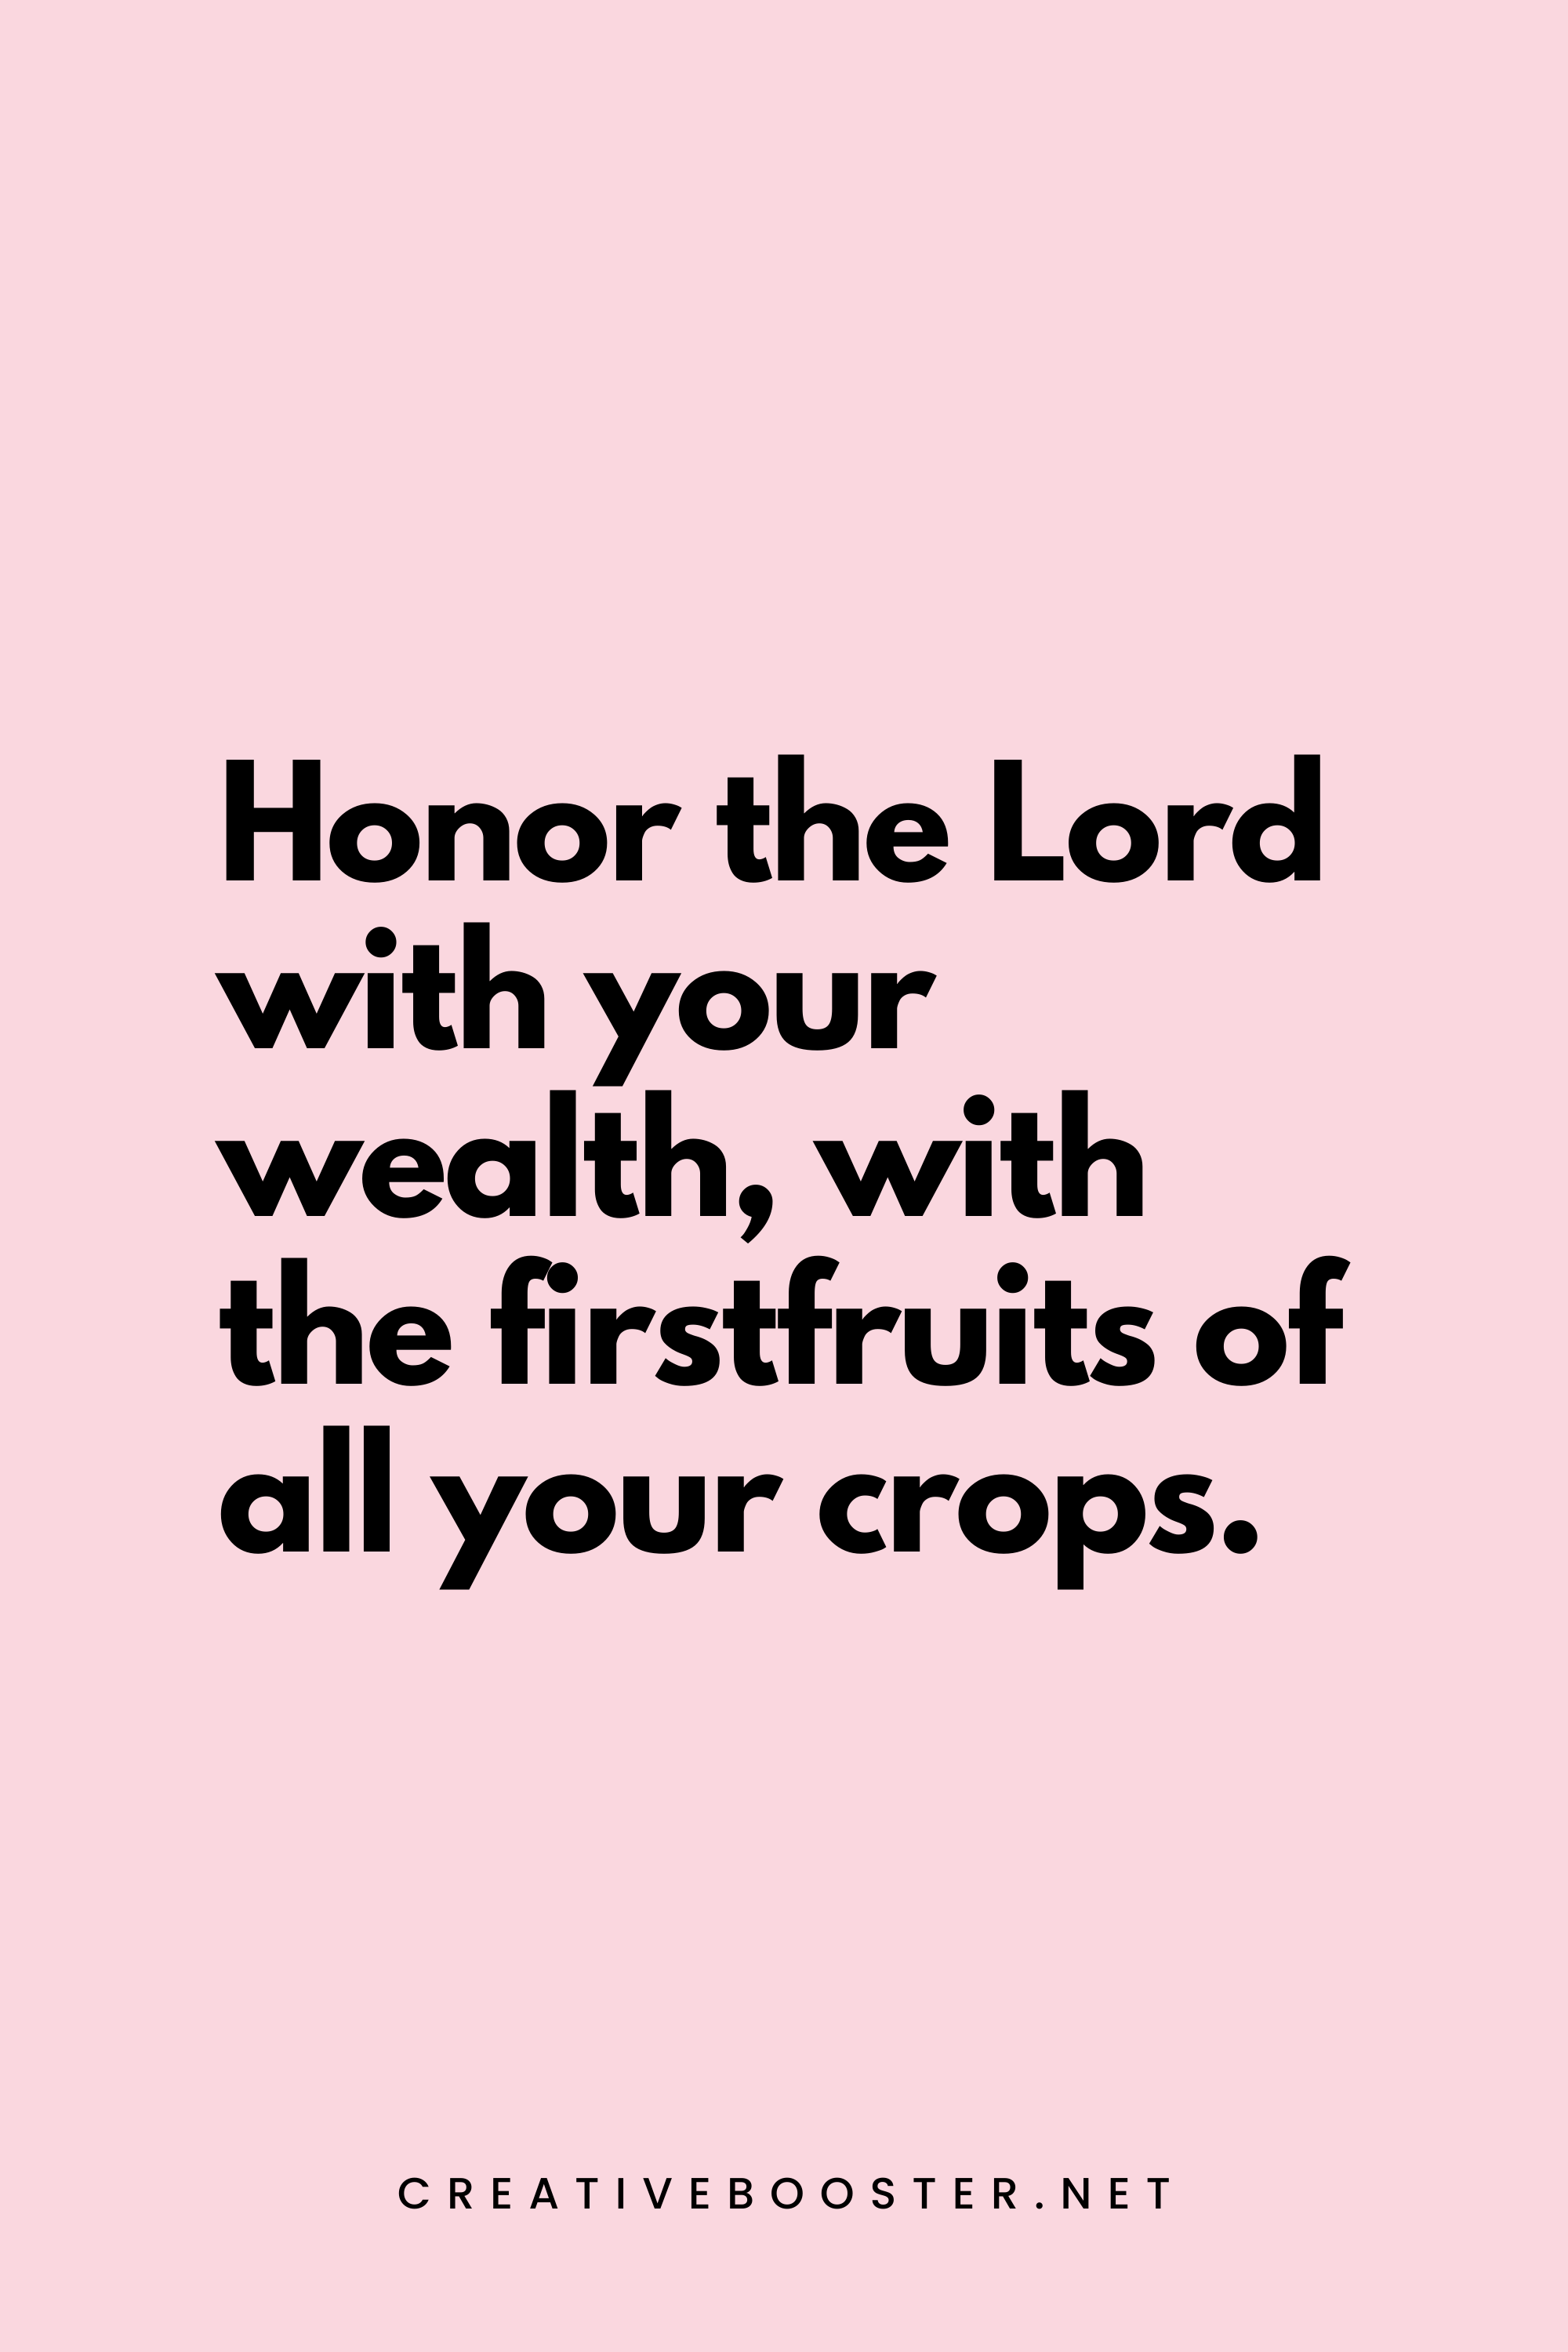 49. Honor the Lord with your wealth, with the firstfruits of all your crops. - Proverbs 3:9 - 5.